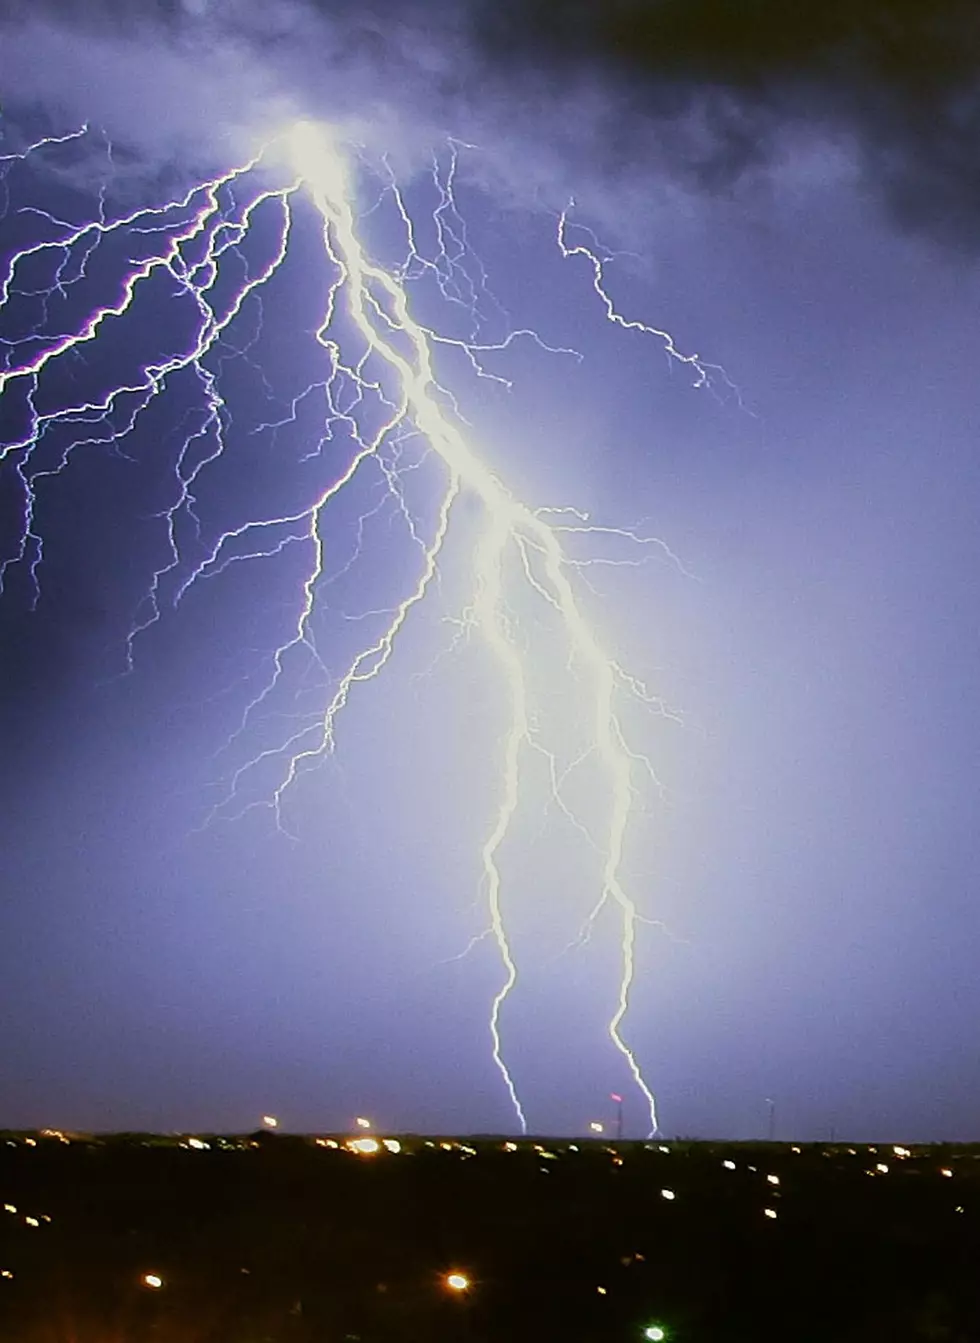 Free Beer &#038; Hot Wings: Bolt of Lightning Nearly Strikes Couple Taking Selfie [Video]